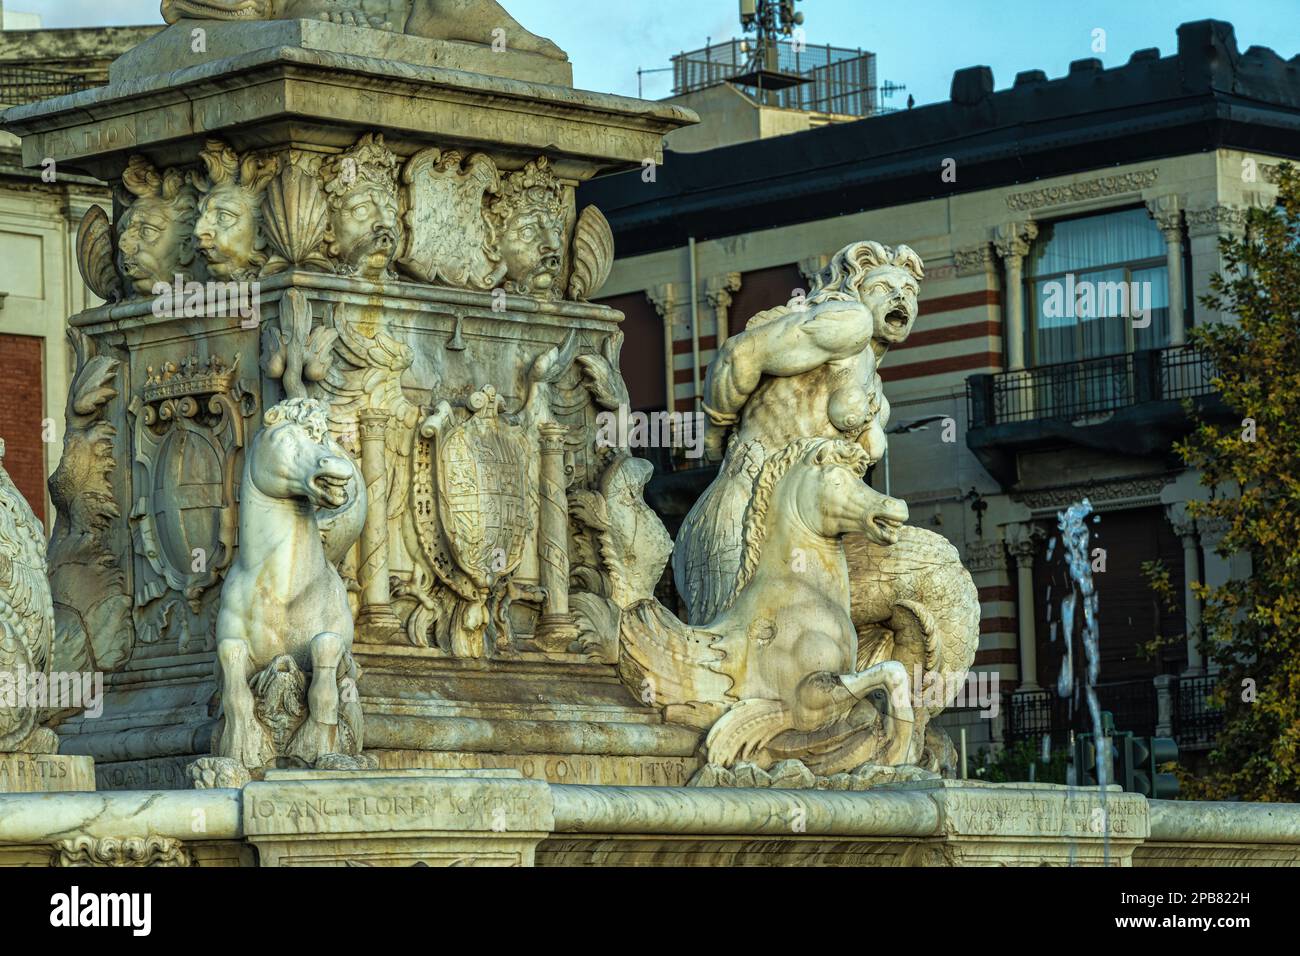 Base of the Fountain of Neptune, statues depicting sea creatures. Messina, Sicily, Italy. Stock Photo